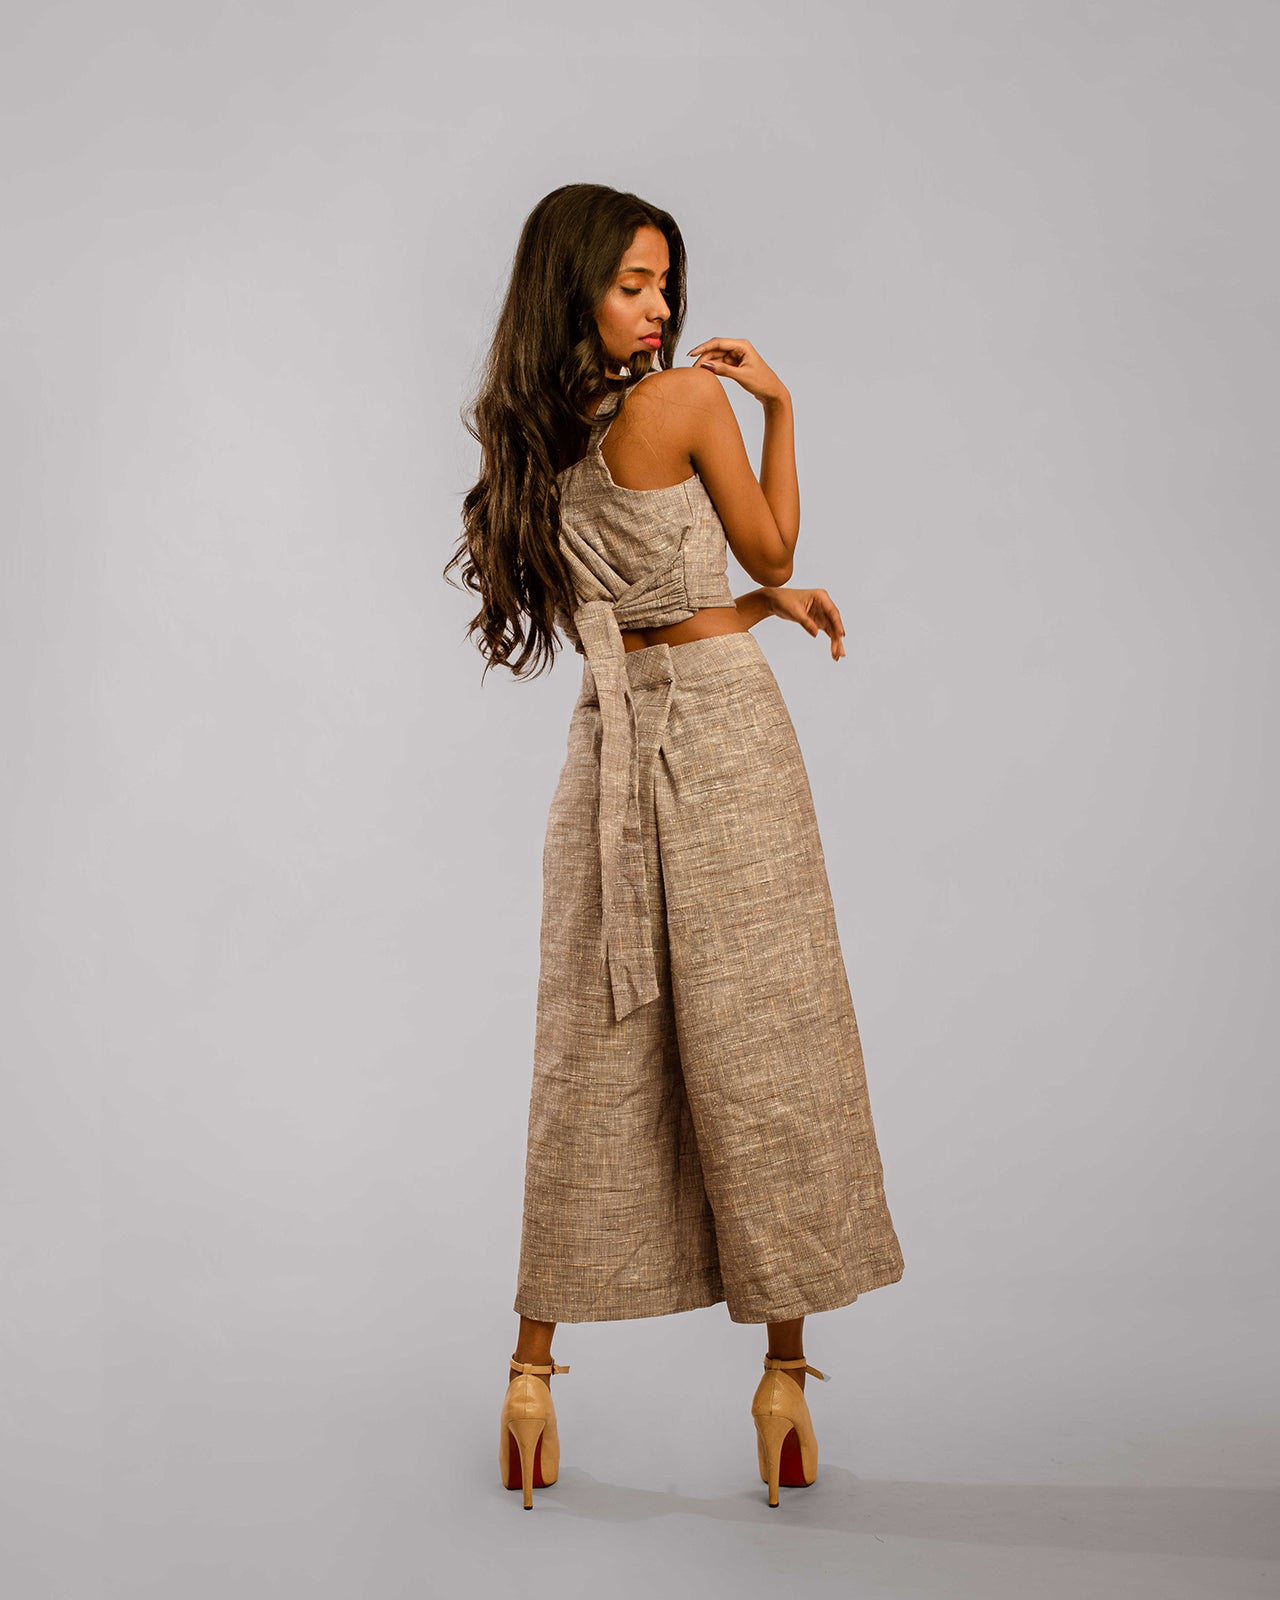 Grey Wide Leg Ankle Length Pant Crop Top With Sash Co-Ords